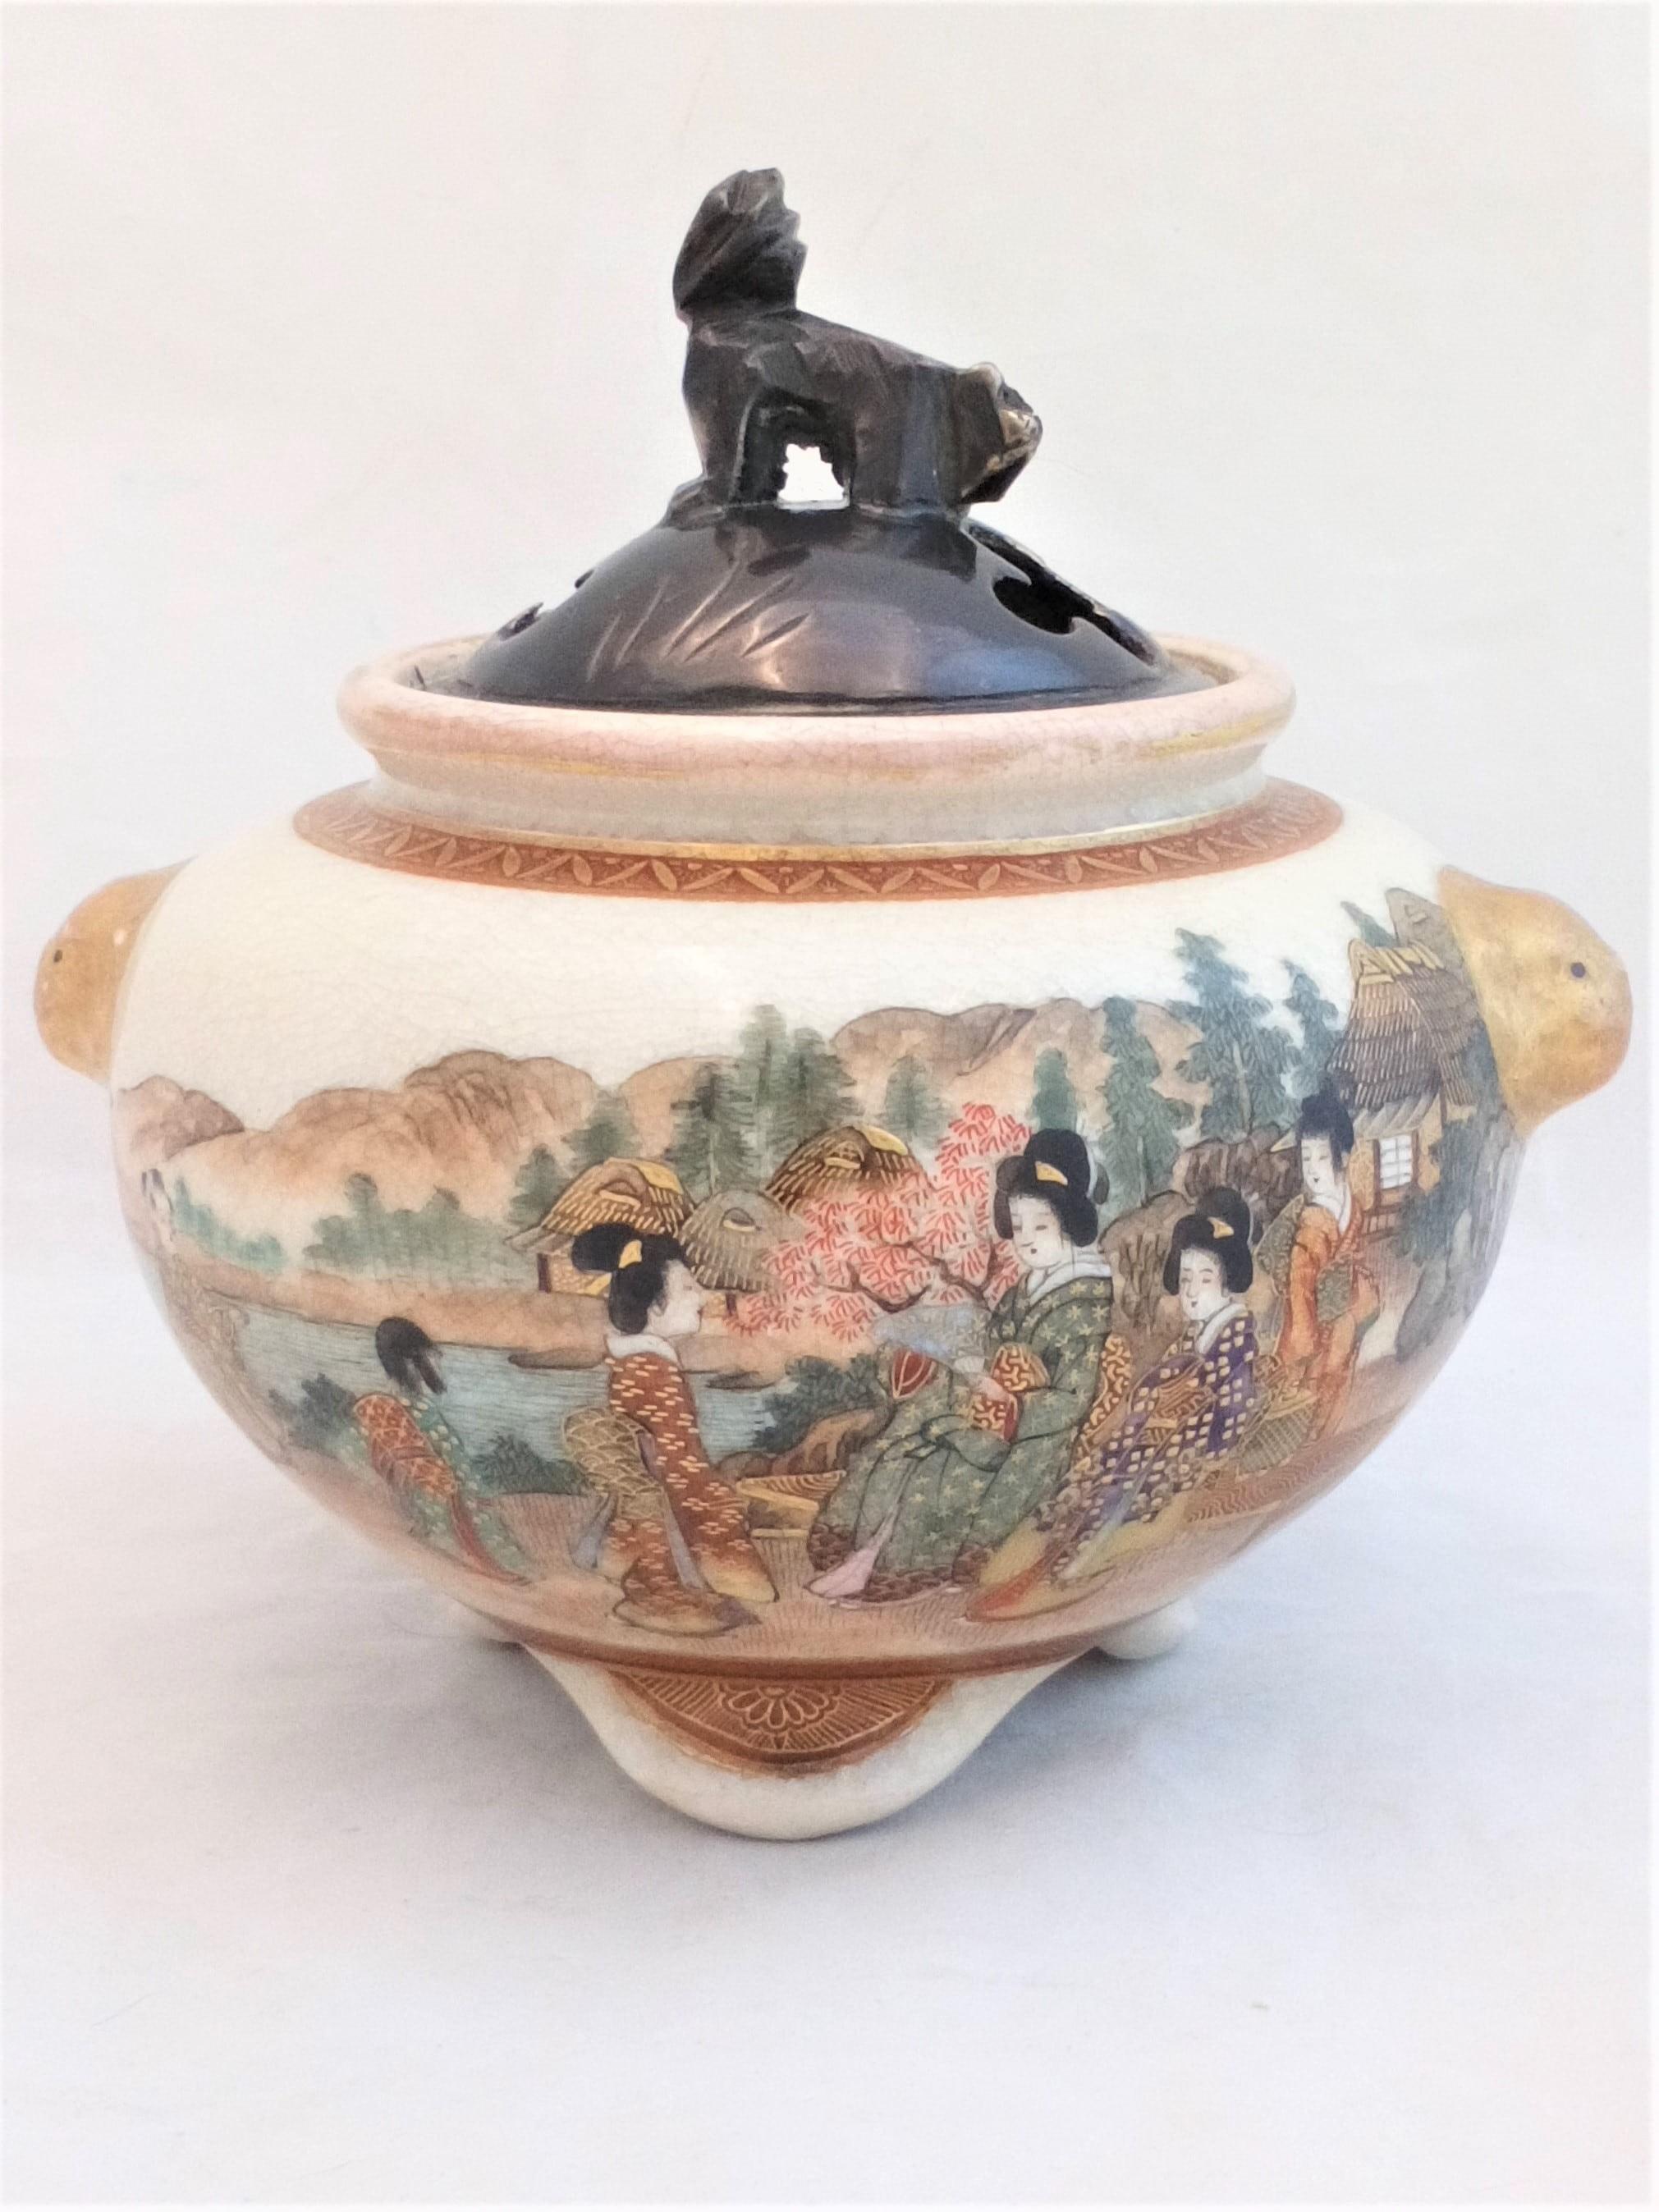 Antique Japanese Satsuma Pottery Koro hand painted figures in a continuous lakeside and mountain scene by Kizan 岐山 Meiji circa 1900